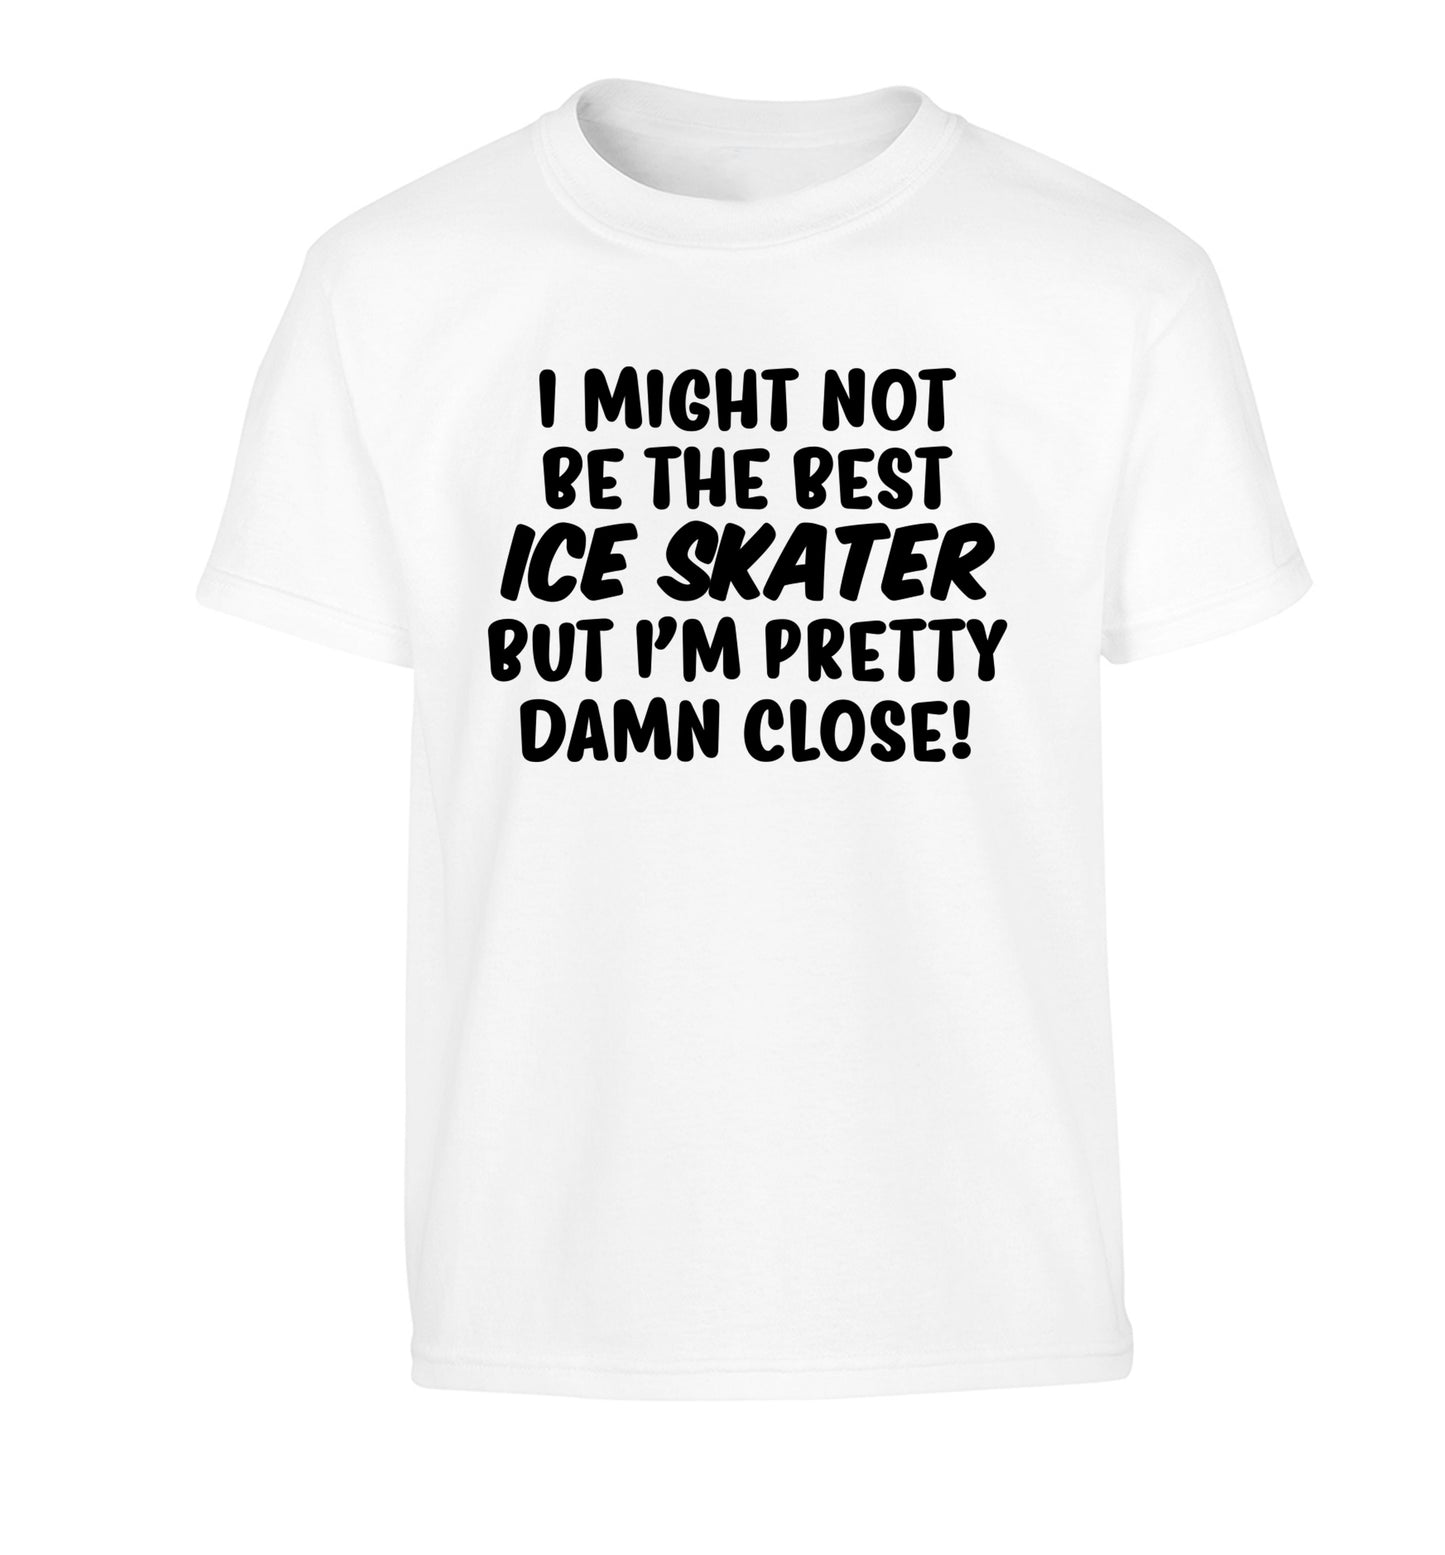 I might not be the best ice skater but I'm pretty damn close! Children's white Tshirt 12-14 Years